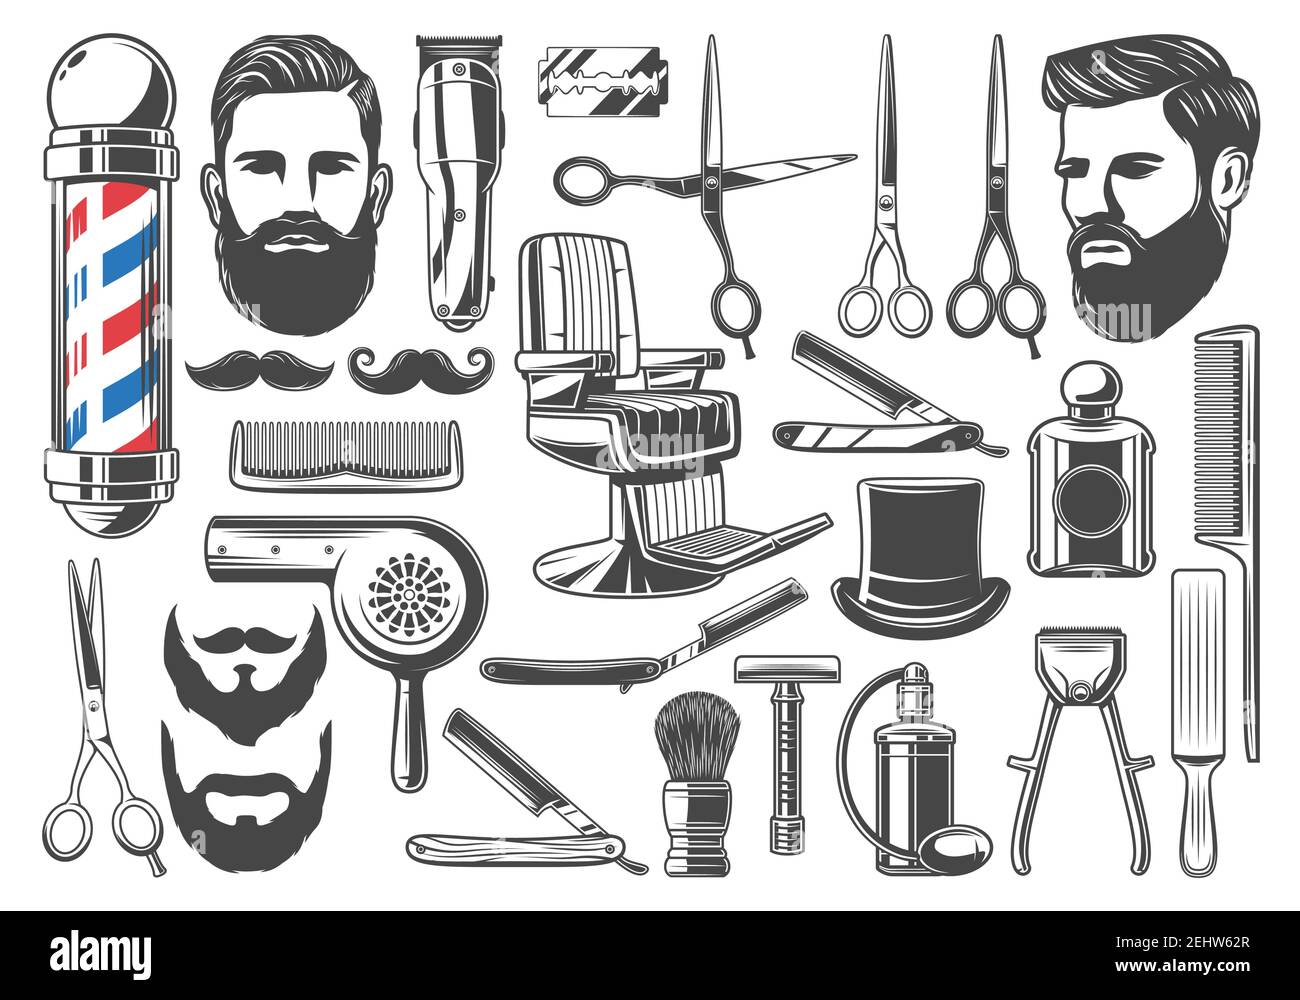 Mustache scissors Cut Out Stock Images & Pictures - Page 3 - Alamy